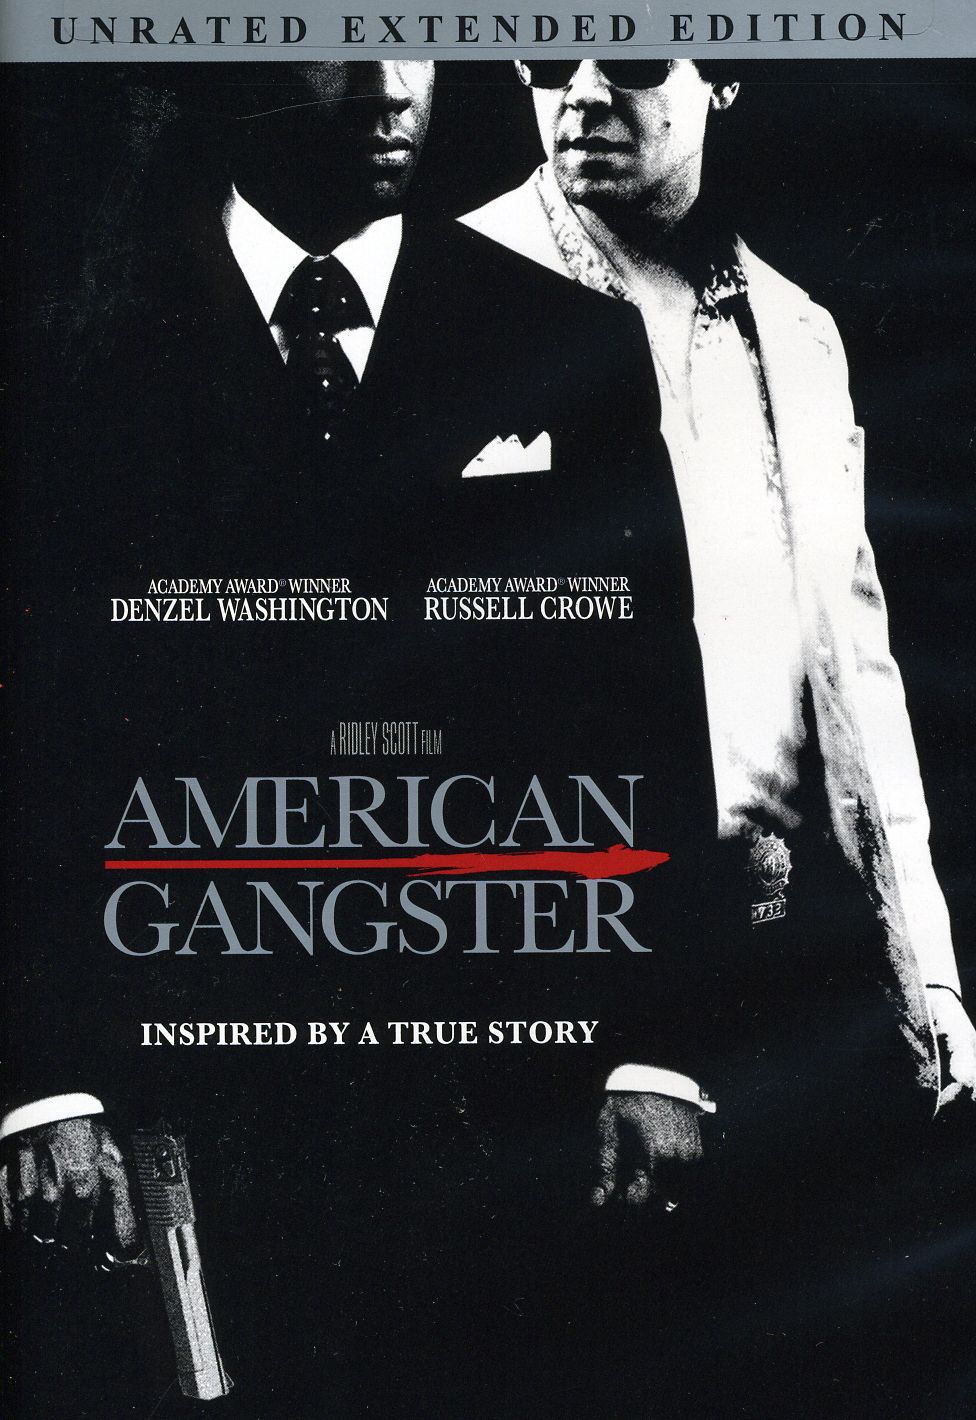 AMERICAN GANGSTER (RATED) (UNRATED) / (EXED AC3)